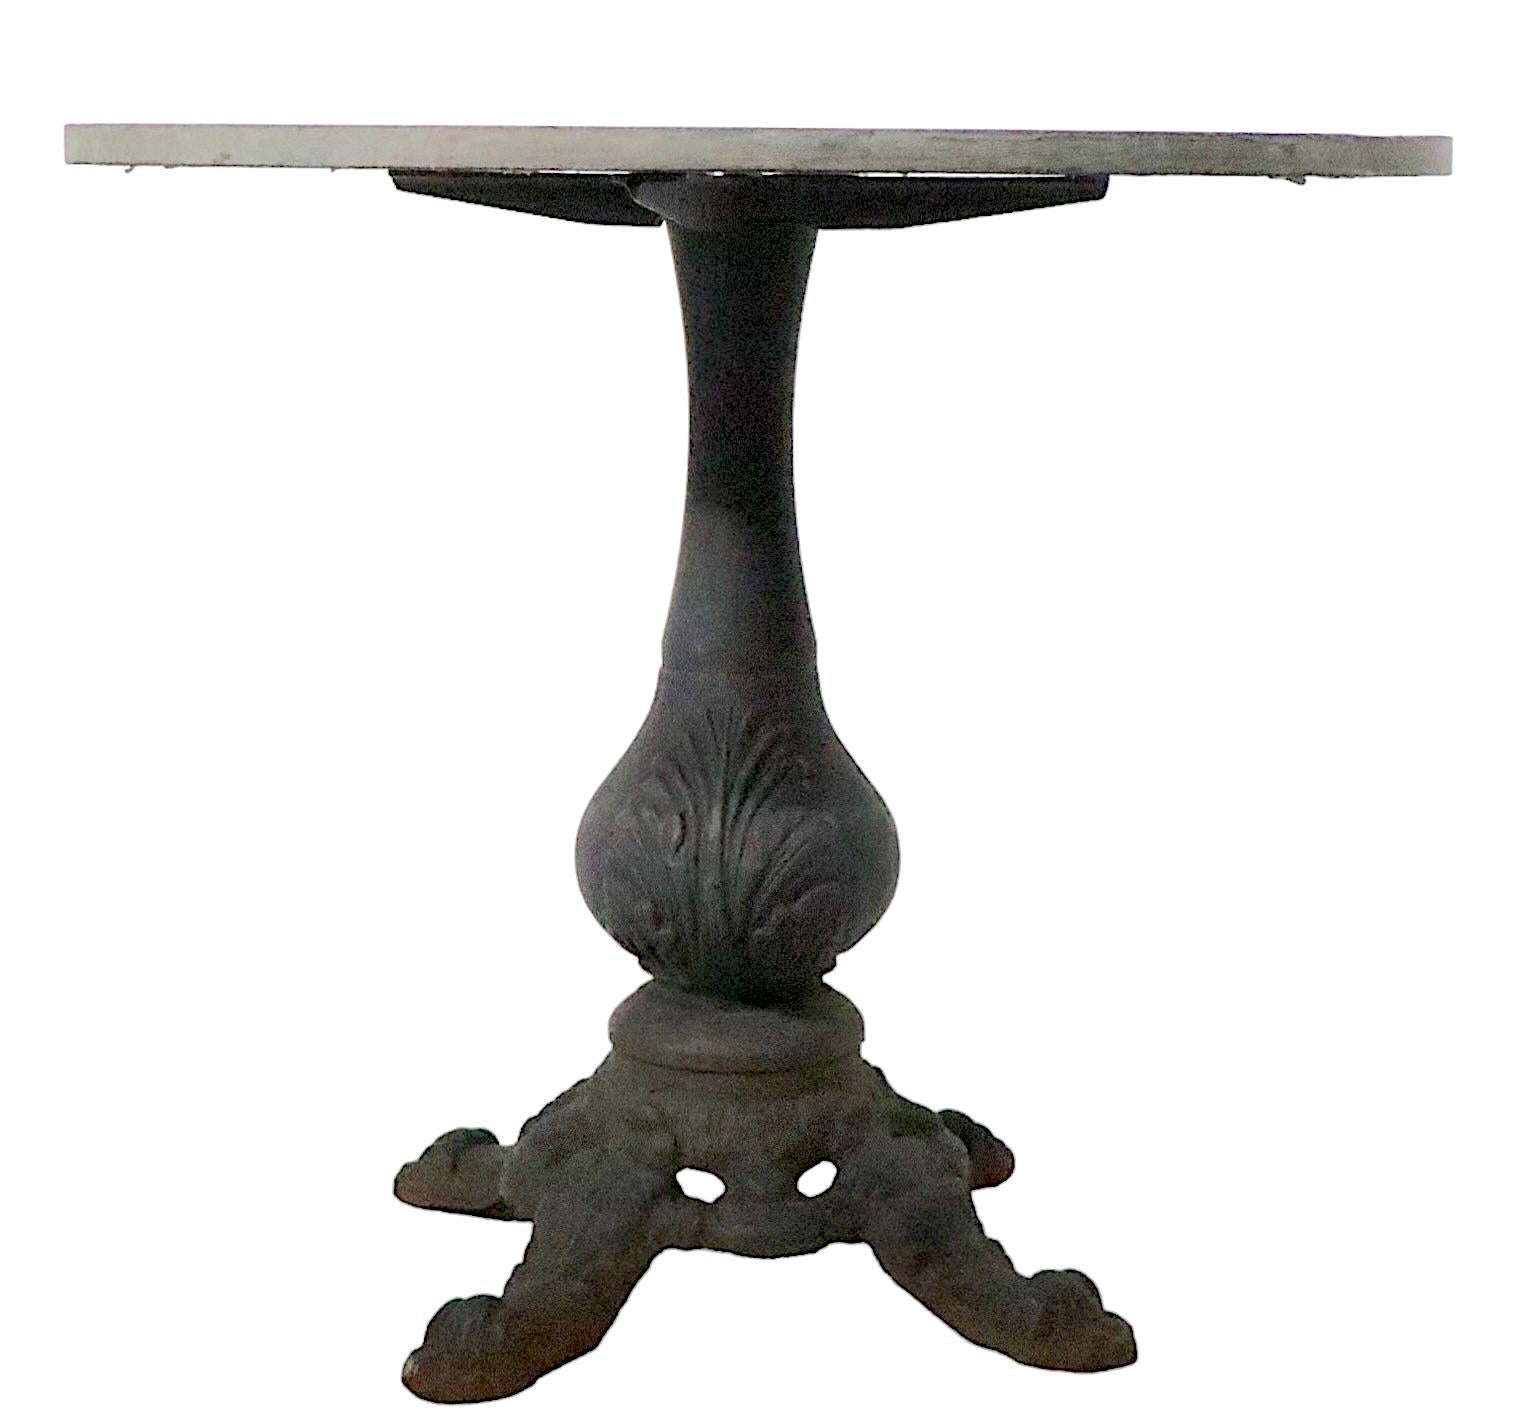 Granite Top Cast Iron Base French Style Cafe Bistro Garden Table c 1920 - 1950s For Sale 1